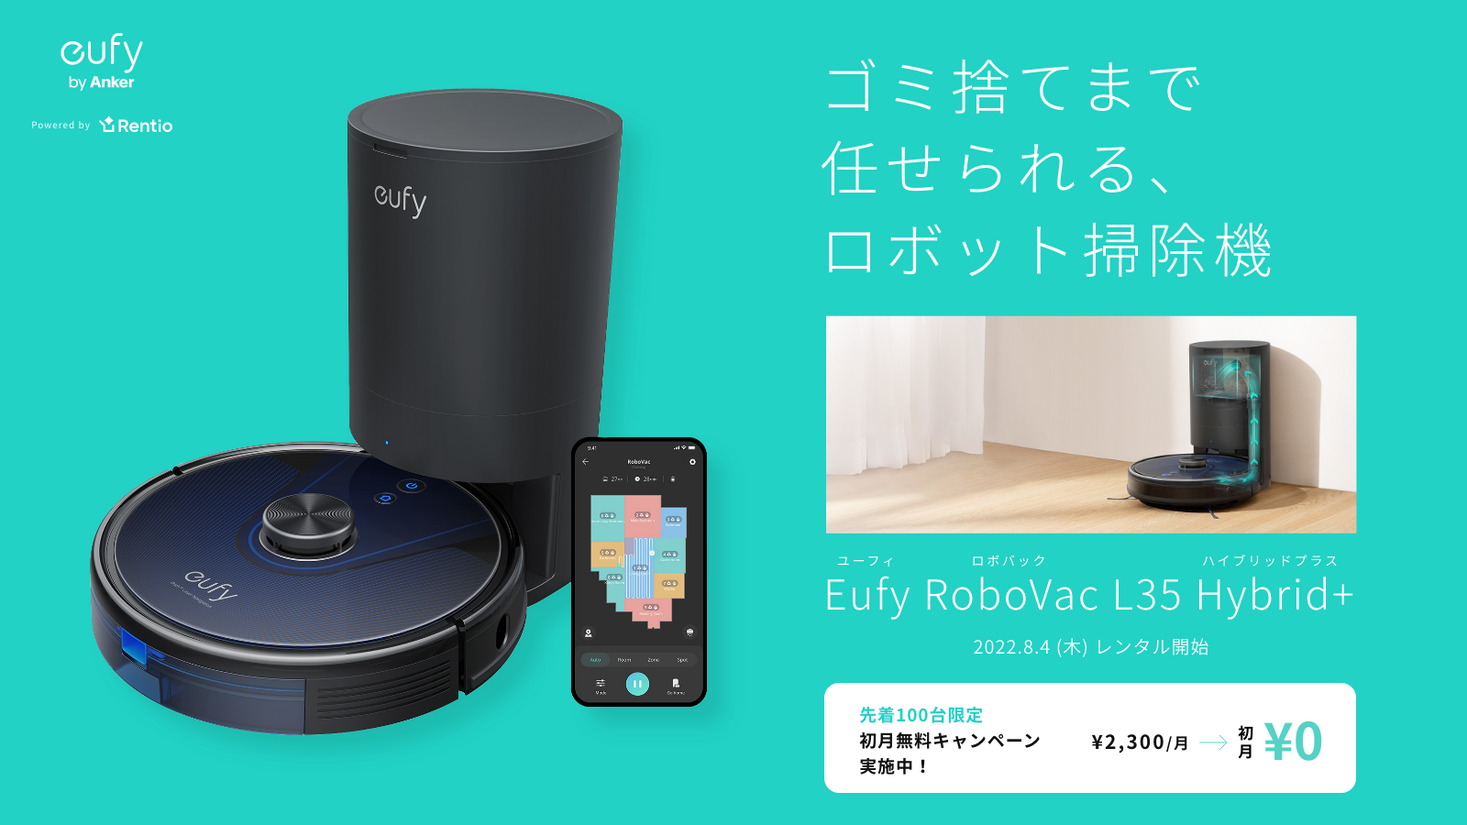 [Eufy]General sales of Eufy’s latest robot vacuum cleaner “Eufy RoboVac L35 Hybrid+” began, and handling began on the identical day with Lentio’s “Eufy rental plan” | Anchor Japan Co., Ltd. press release